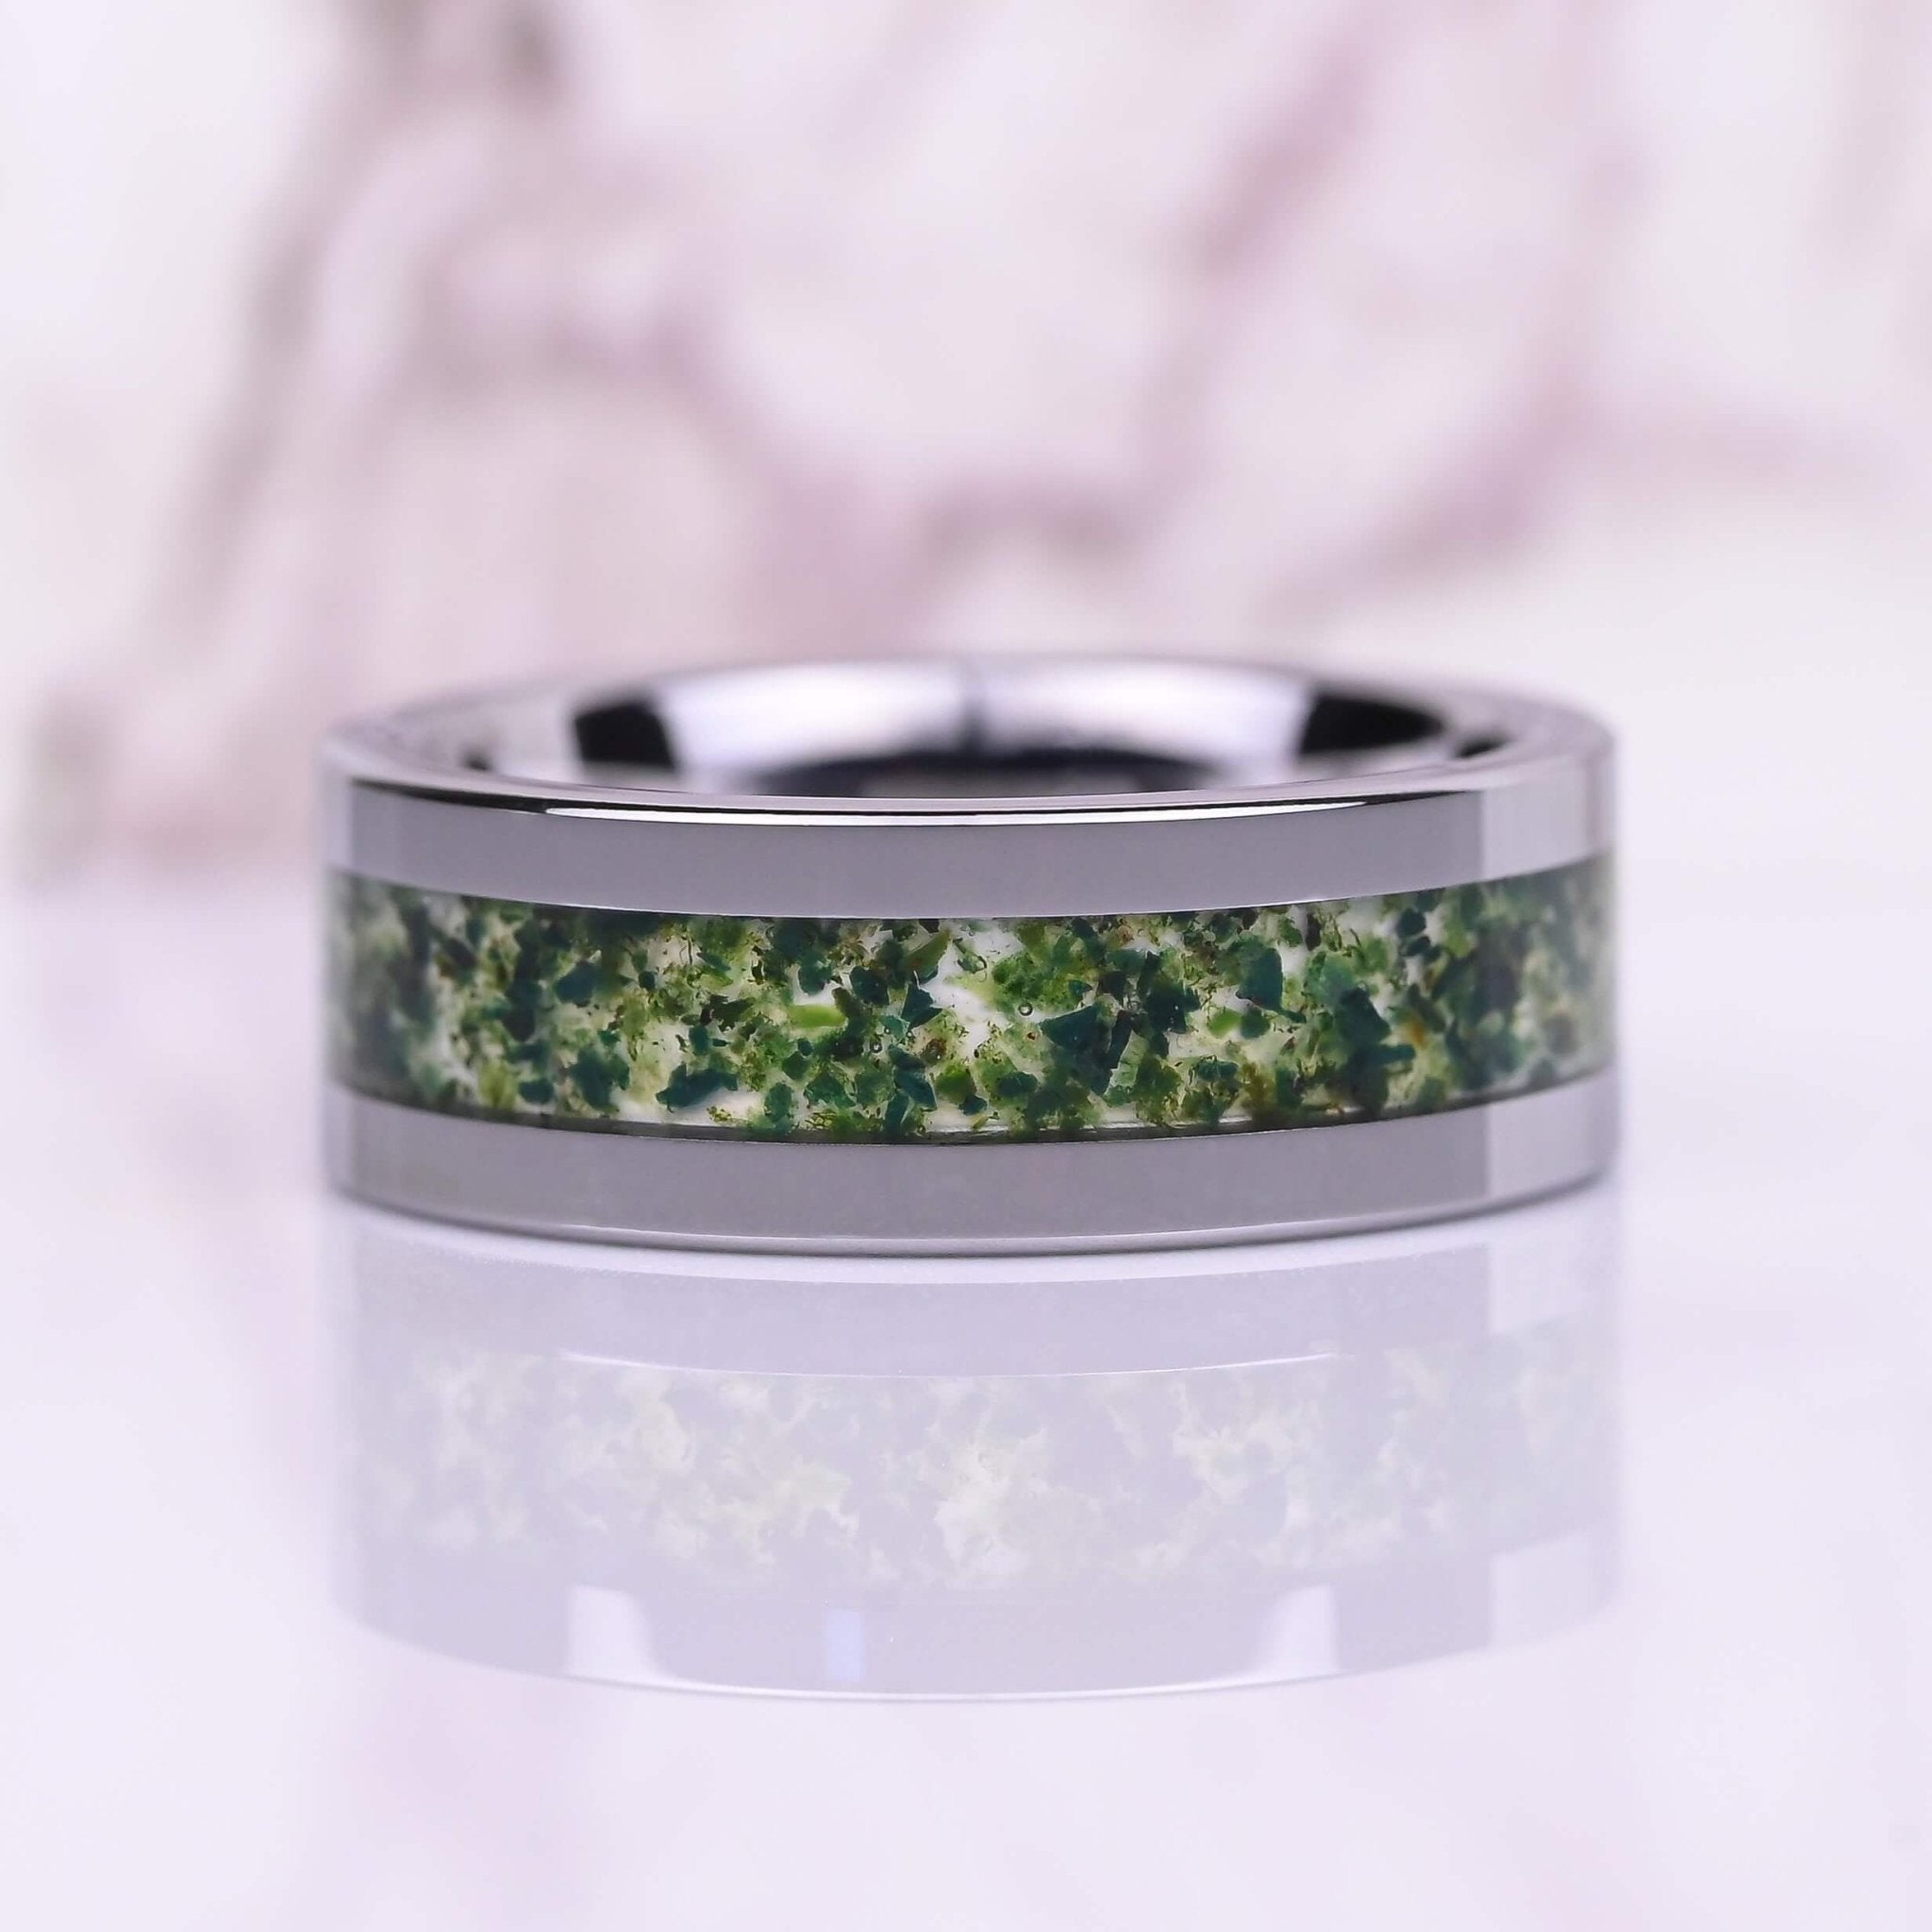 The Agate - Mens Wedding Band - Silver Moss Agate Tungsten Ring - Green Moss Agate Inlay